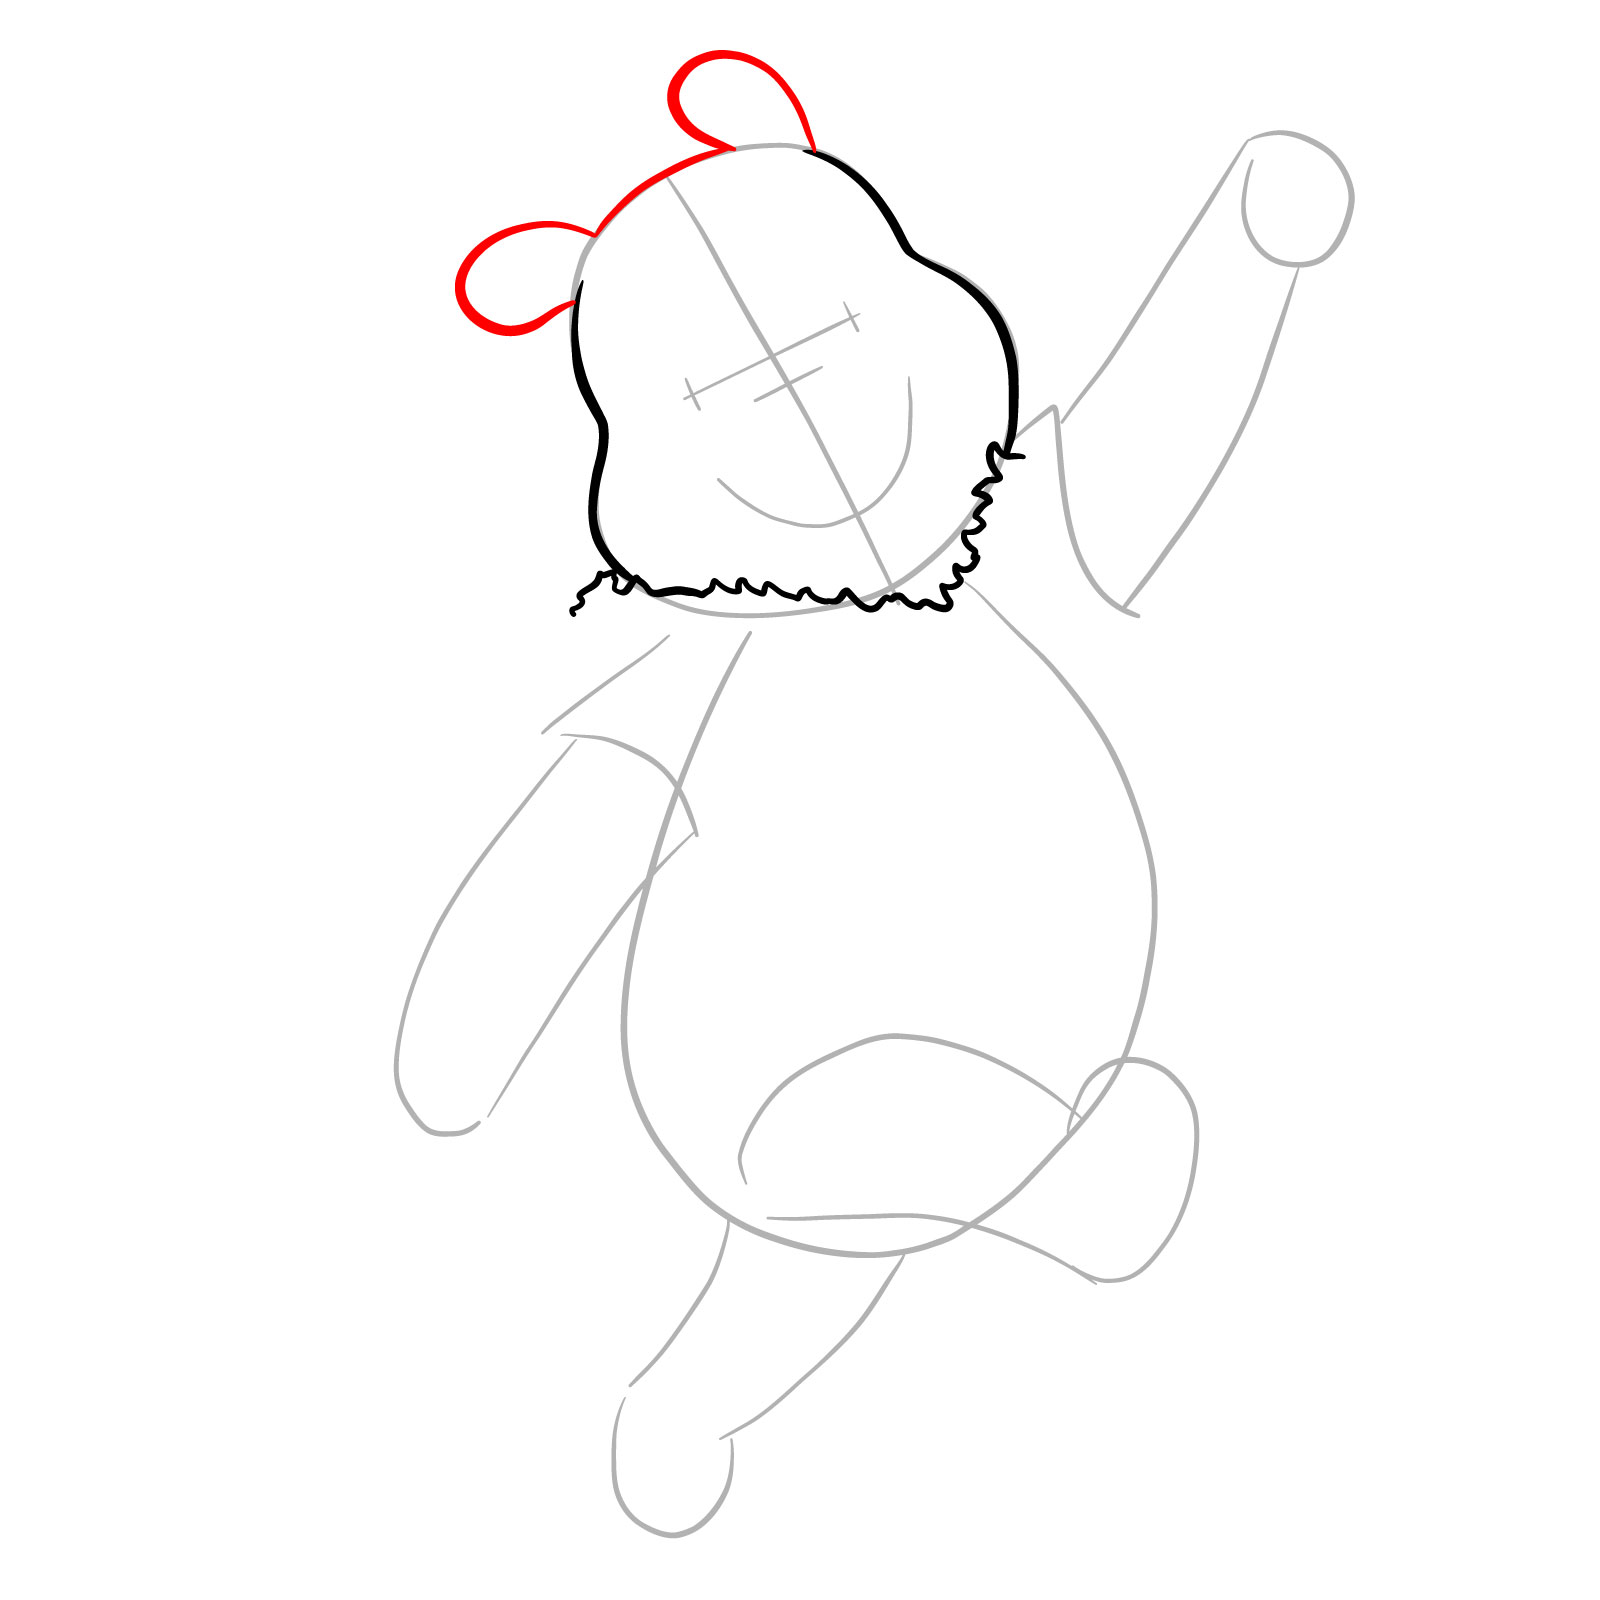 How to draw Winnie-the-Pooh Christmas style - step 06